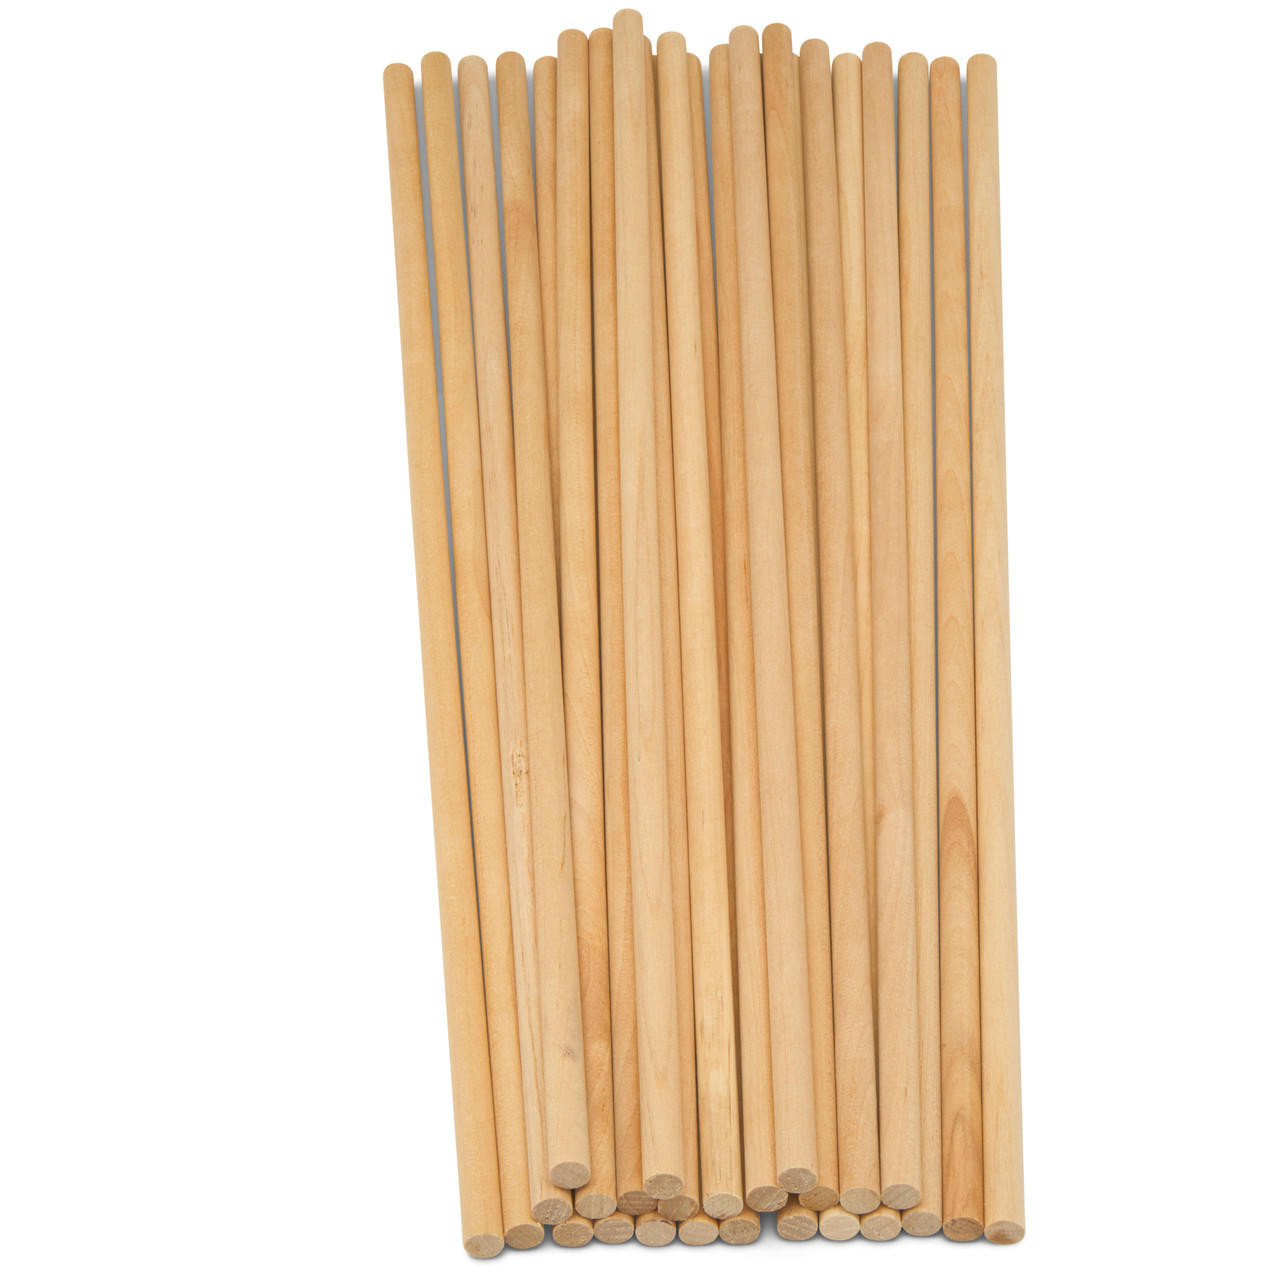 Round Wooden Dowel Rods Lollipop Sticks for Crafts and Cake Pops